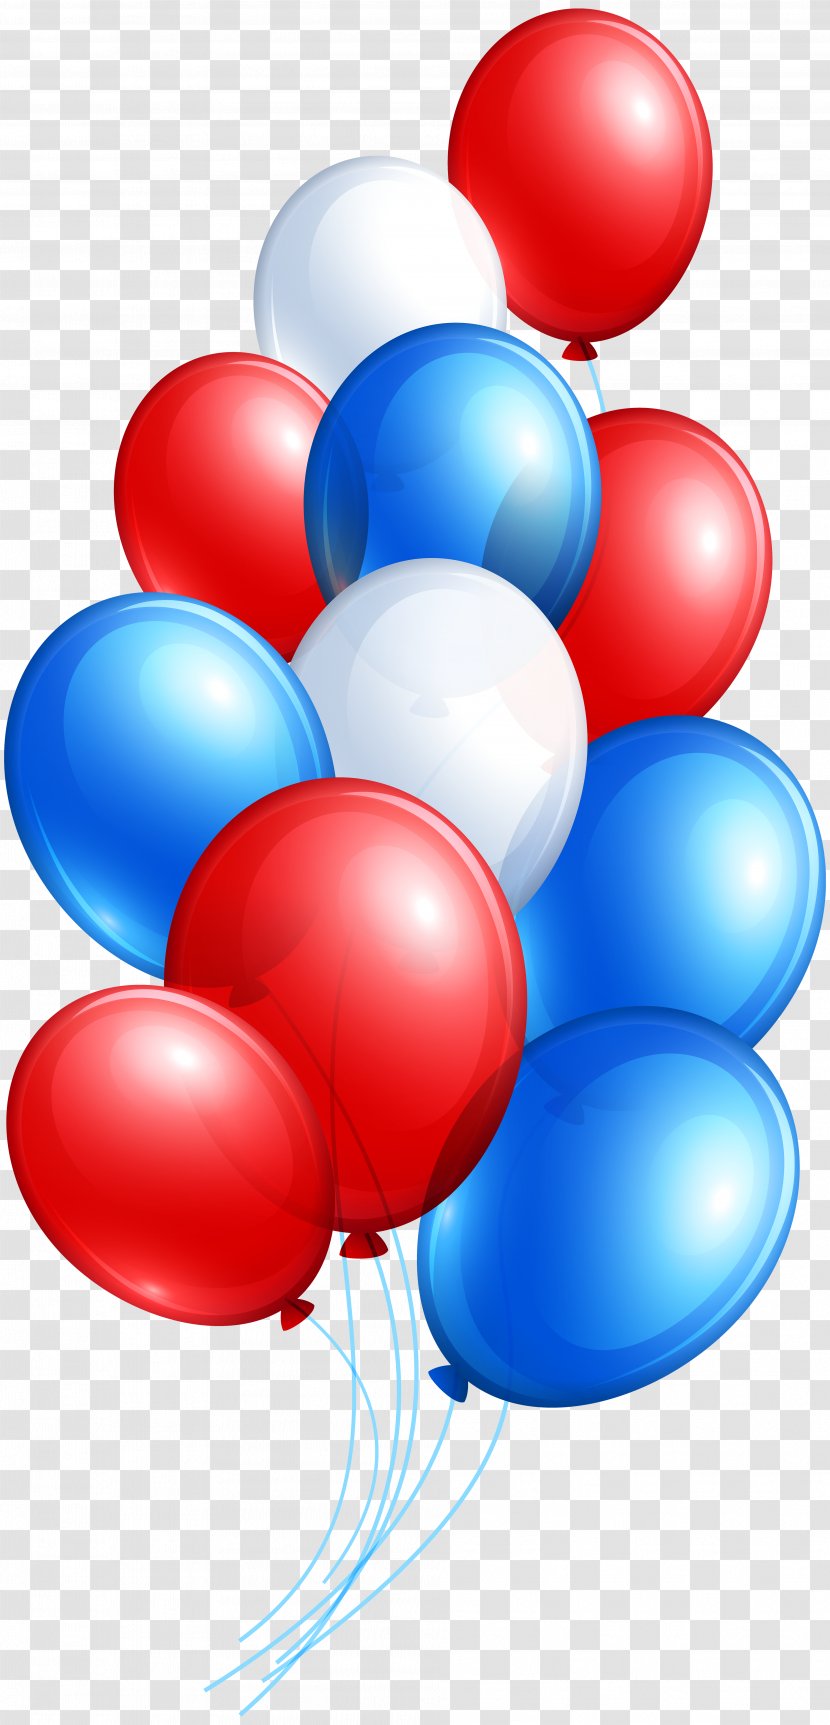 Independence Day Balloon Clip Art - Sphere - Balloons Transparent PNG